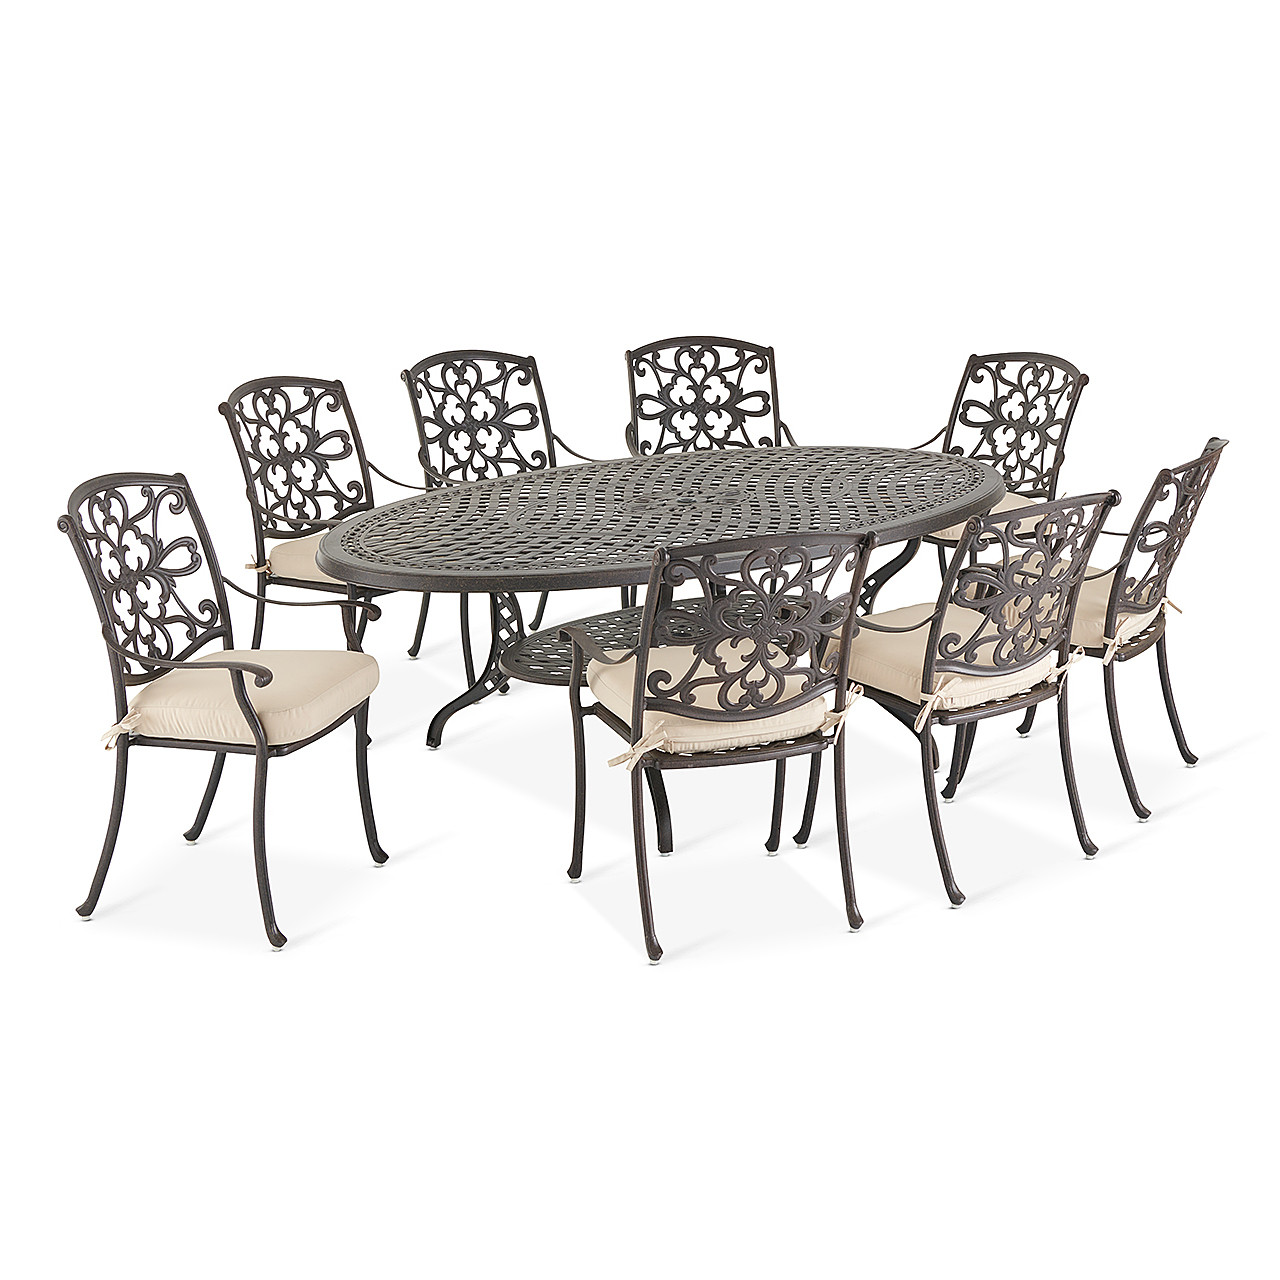 Carlisle Aged Bronze Cast Aluminum and Cushion 9 Pc. Dining Set with 87 x 48 in. Table